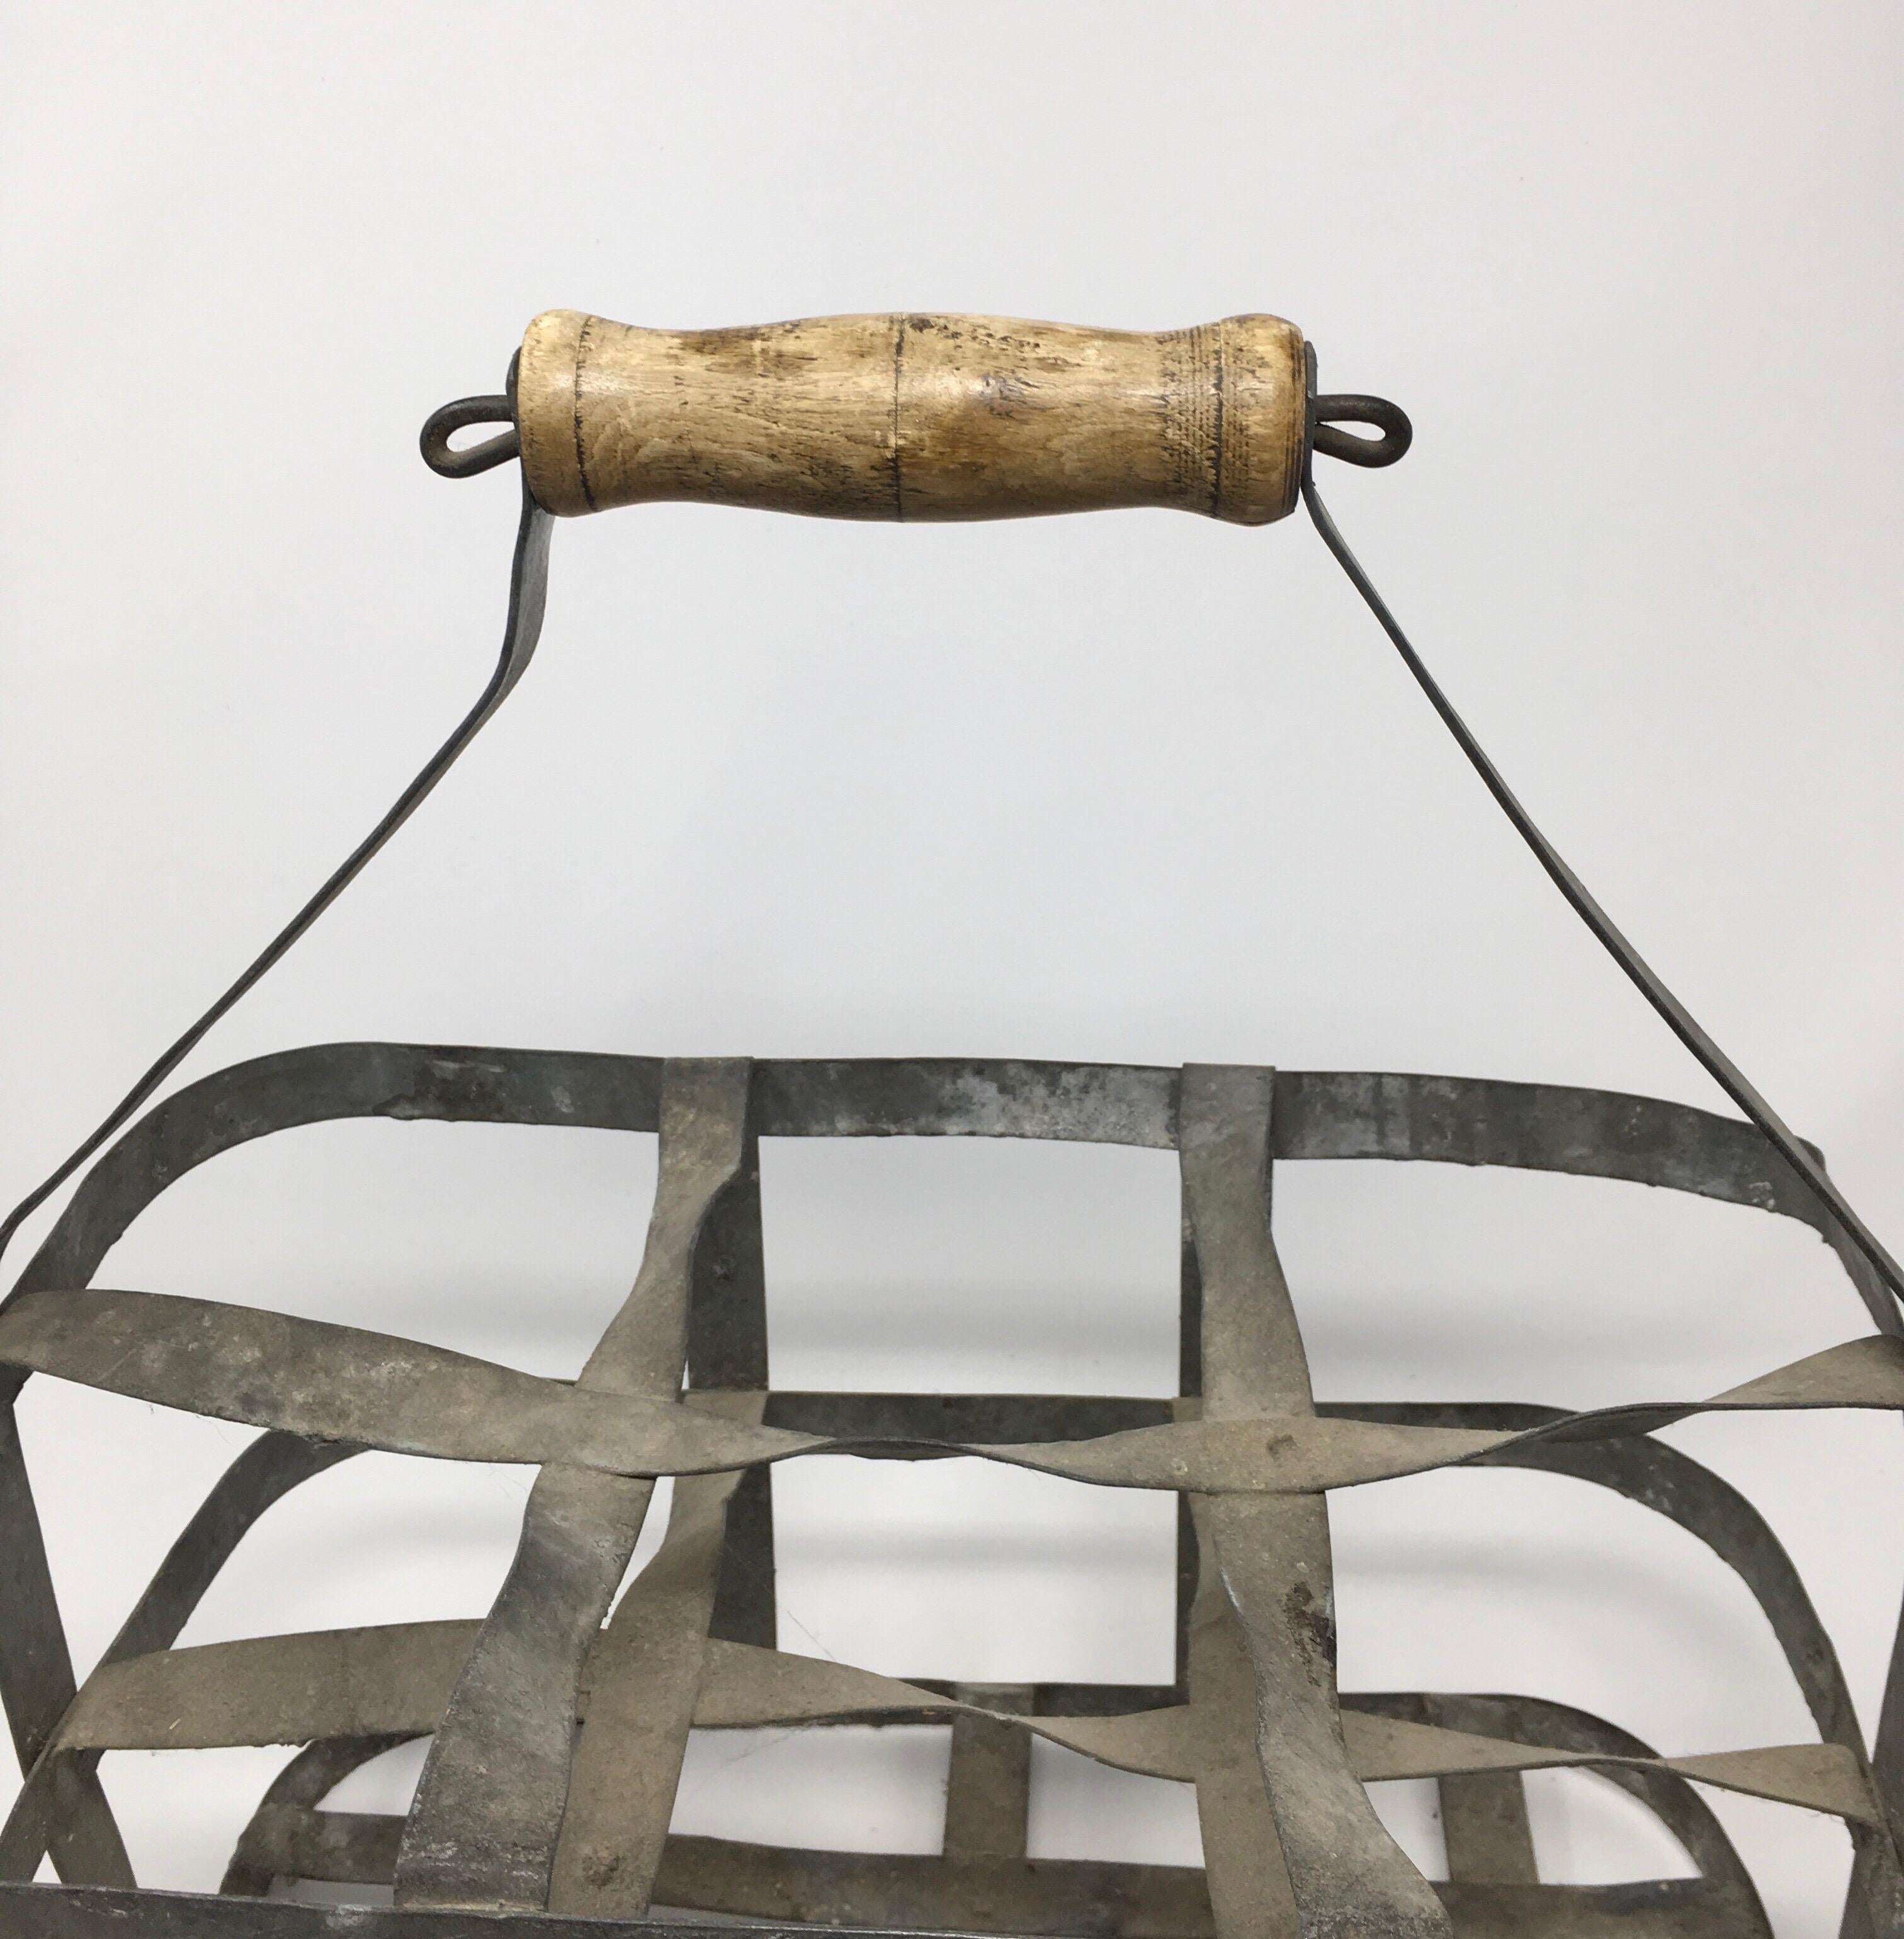 Early 20th Century French Six Bottle Wine Carrier Basket from France 2